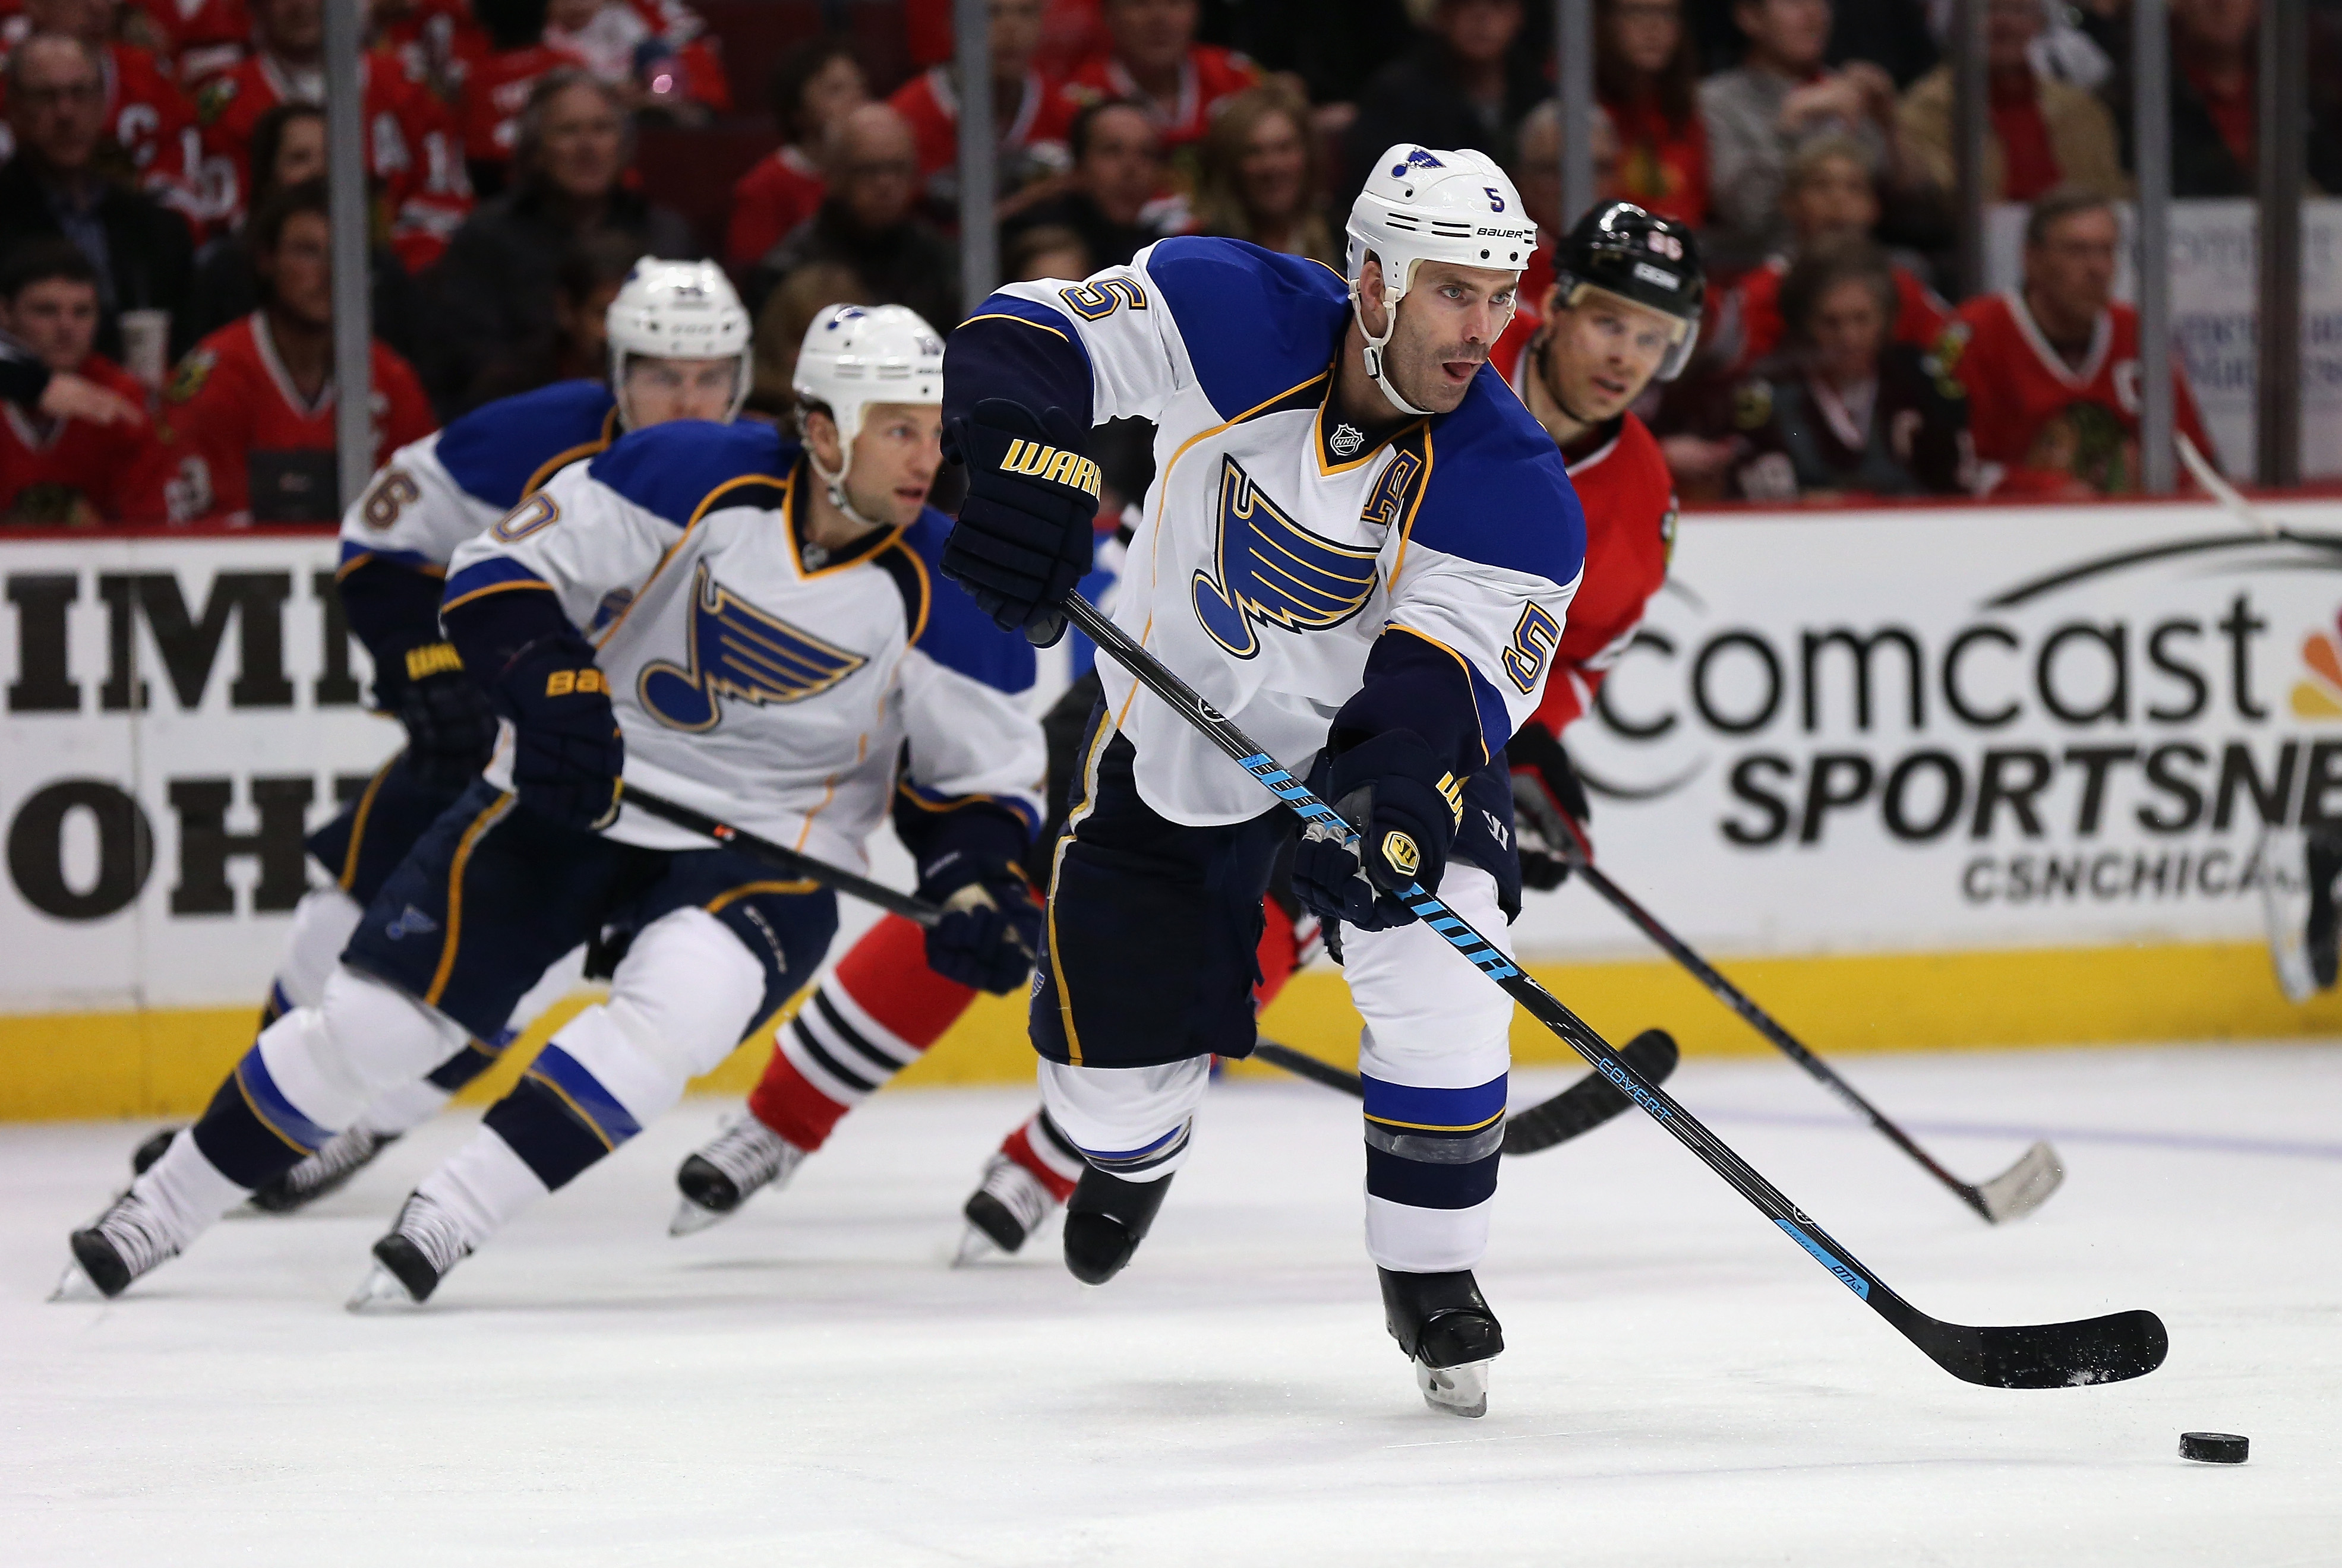 The Blues are showing why St. Louis is becoming the Heartland of Hockey